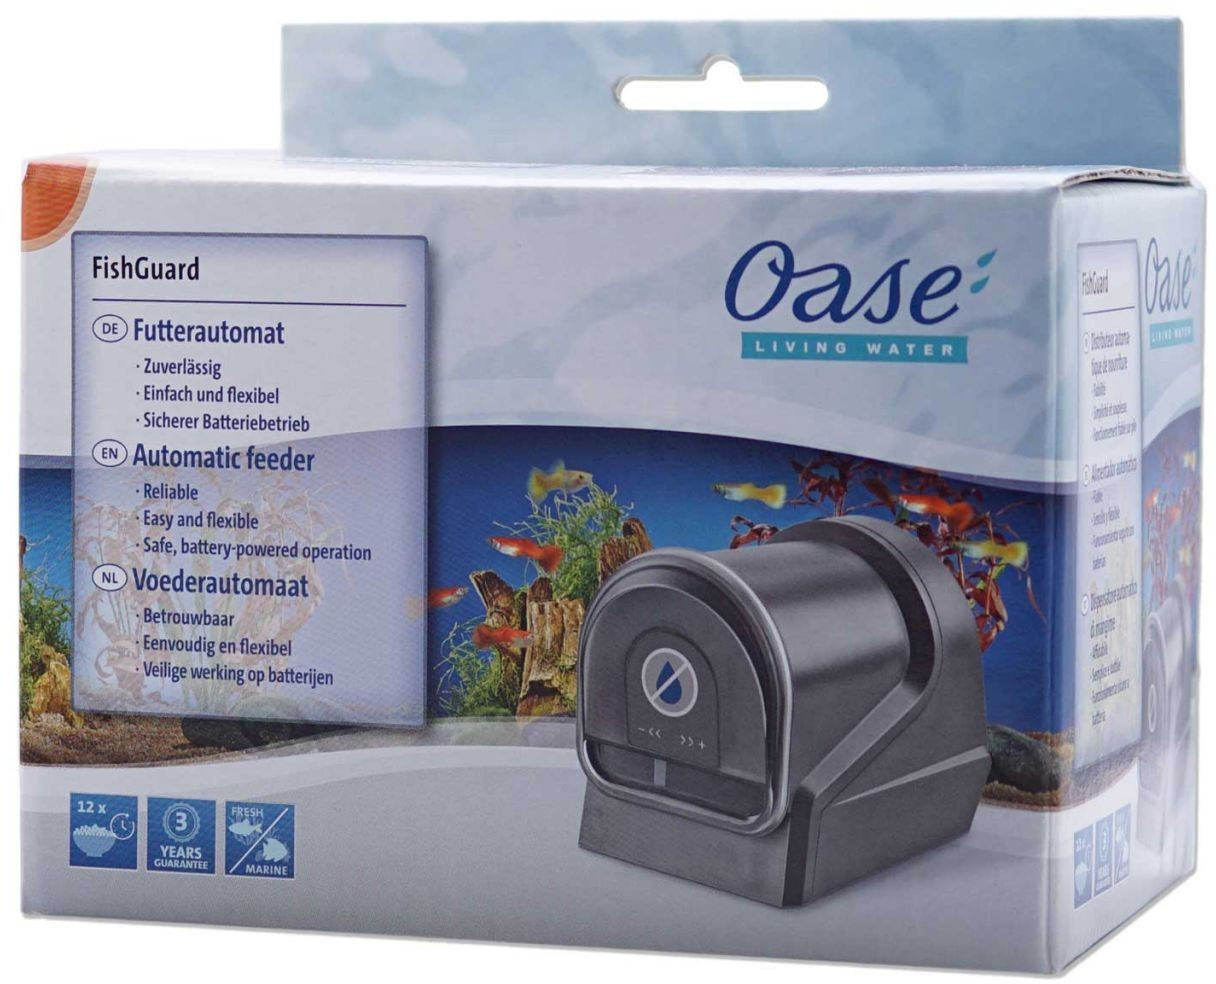 automatic fish feeder reviews